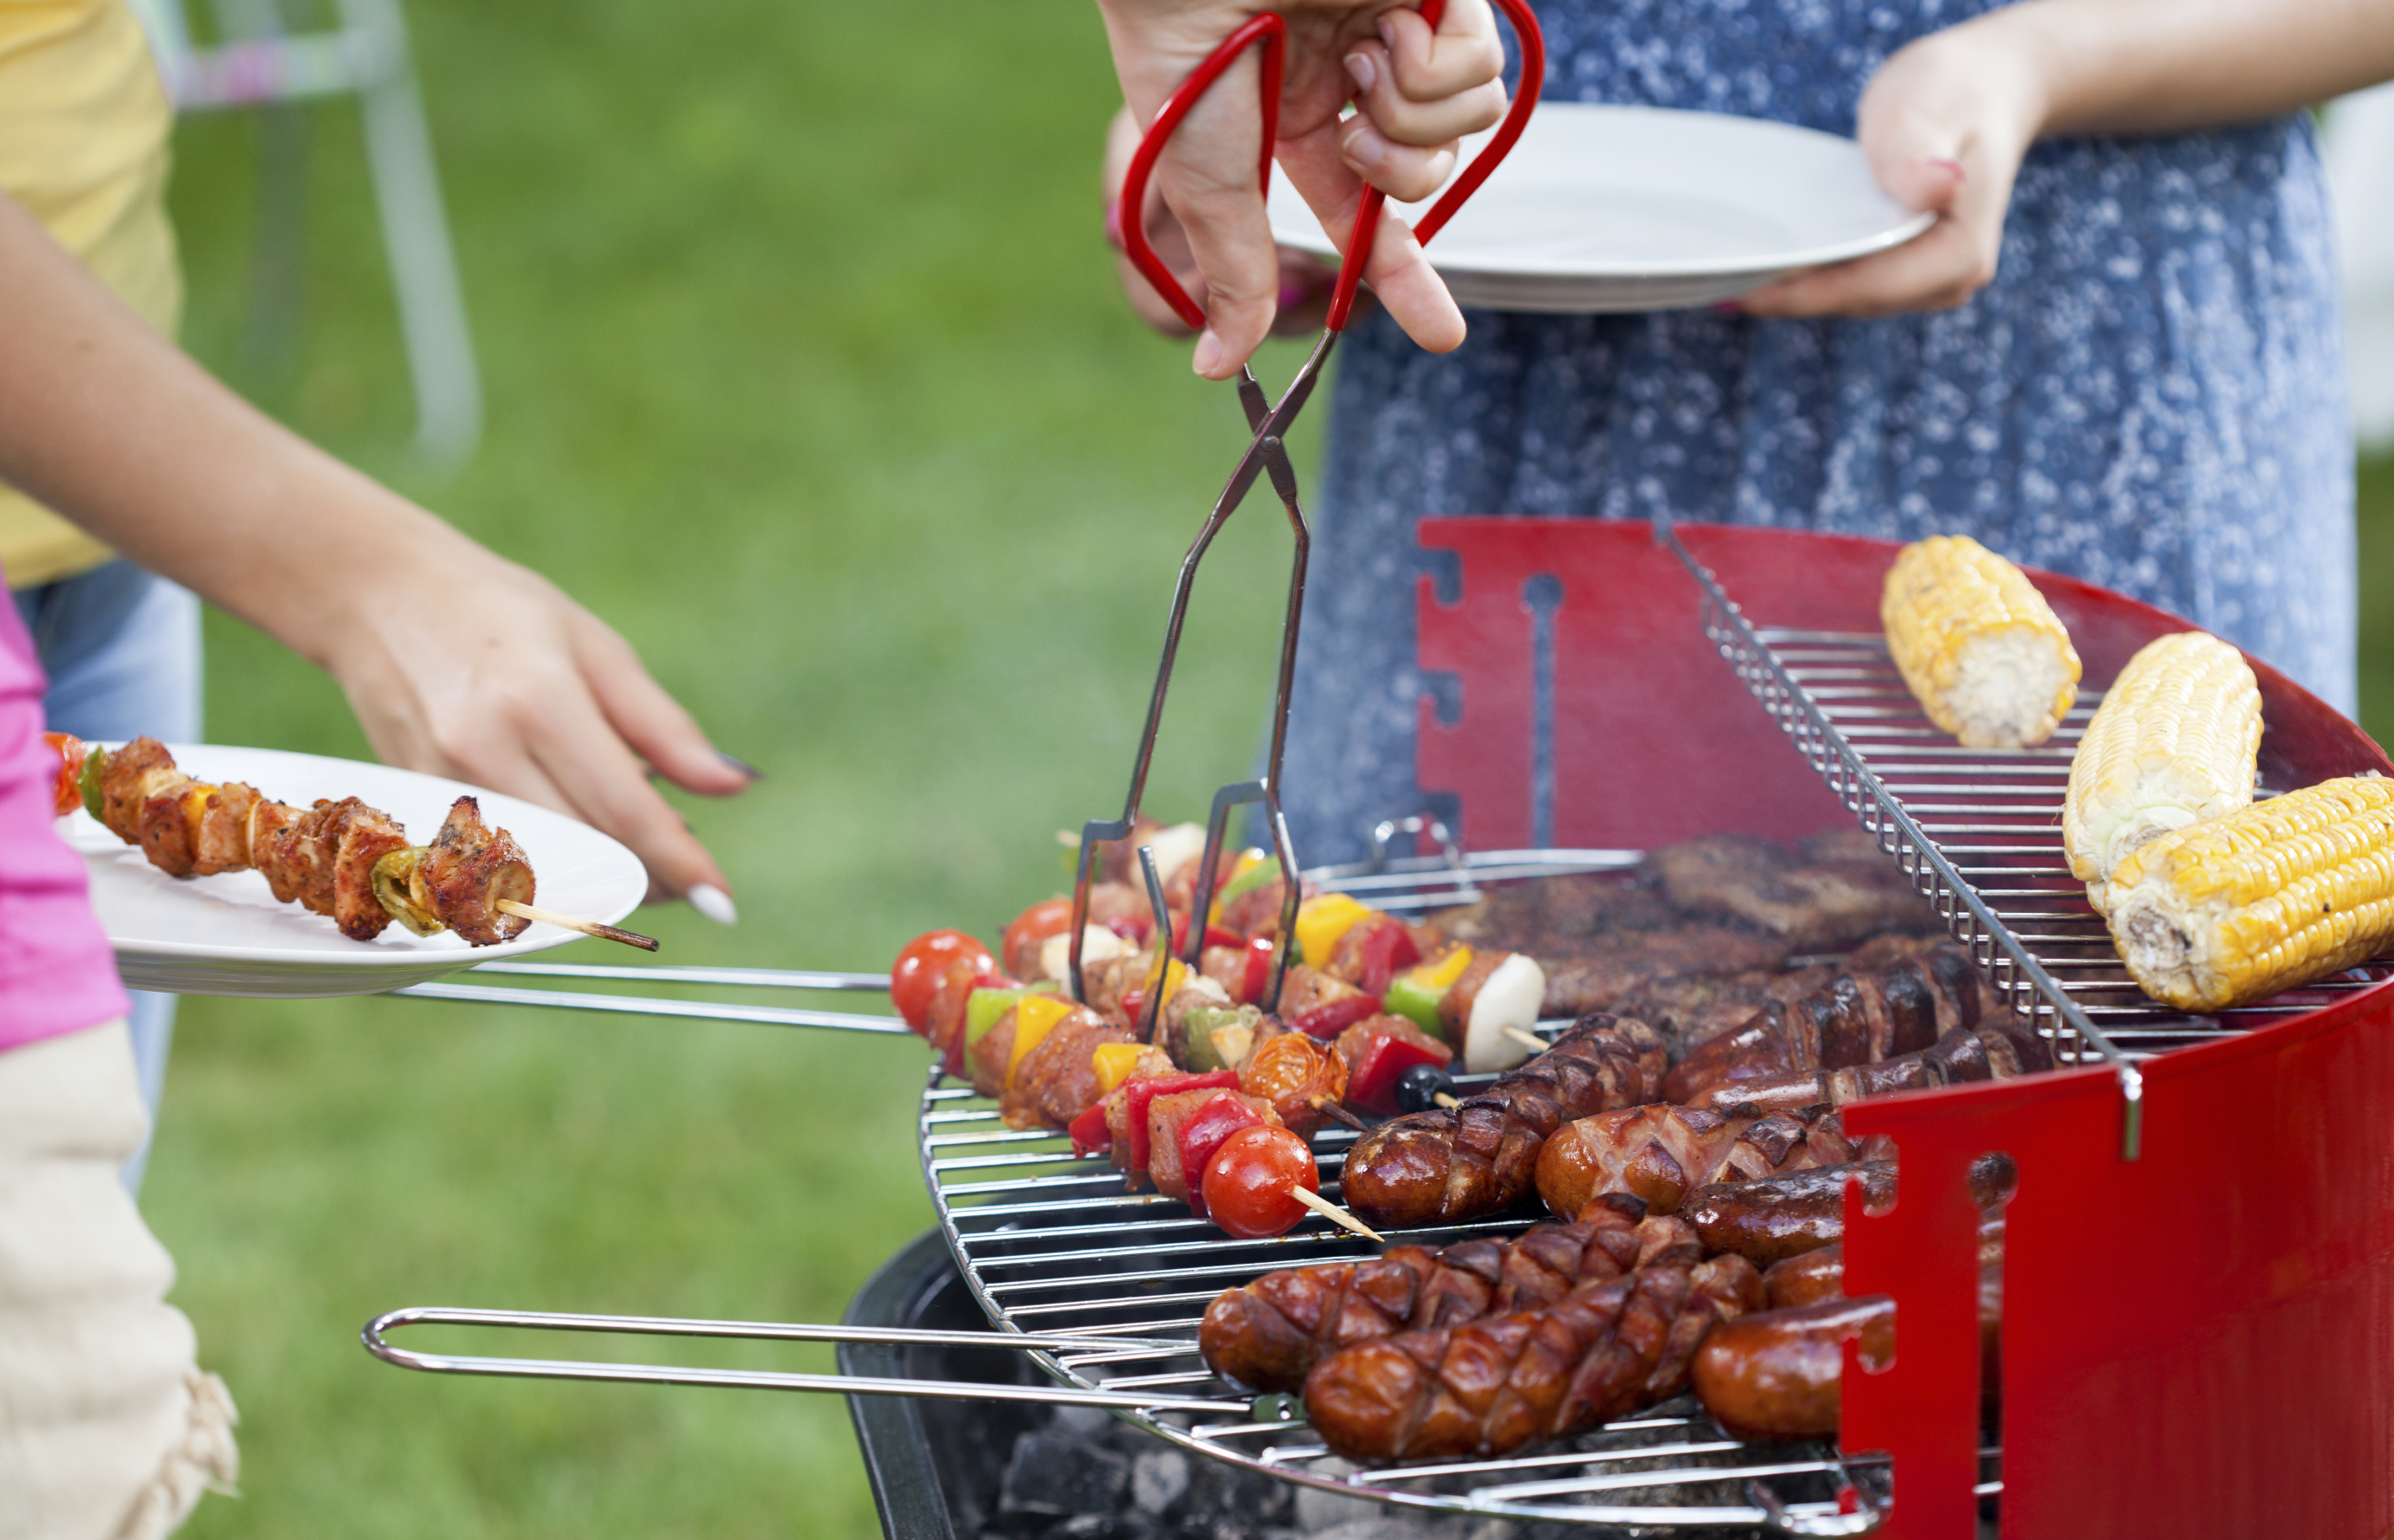 Food safety tips for barbecue season - CBS News